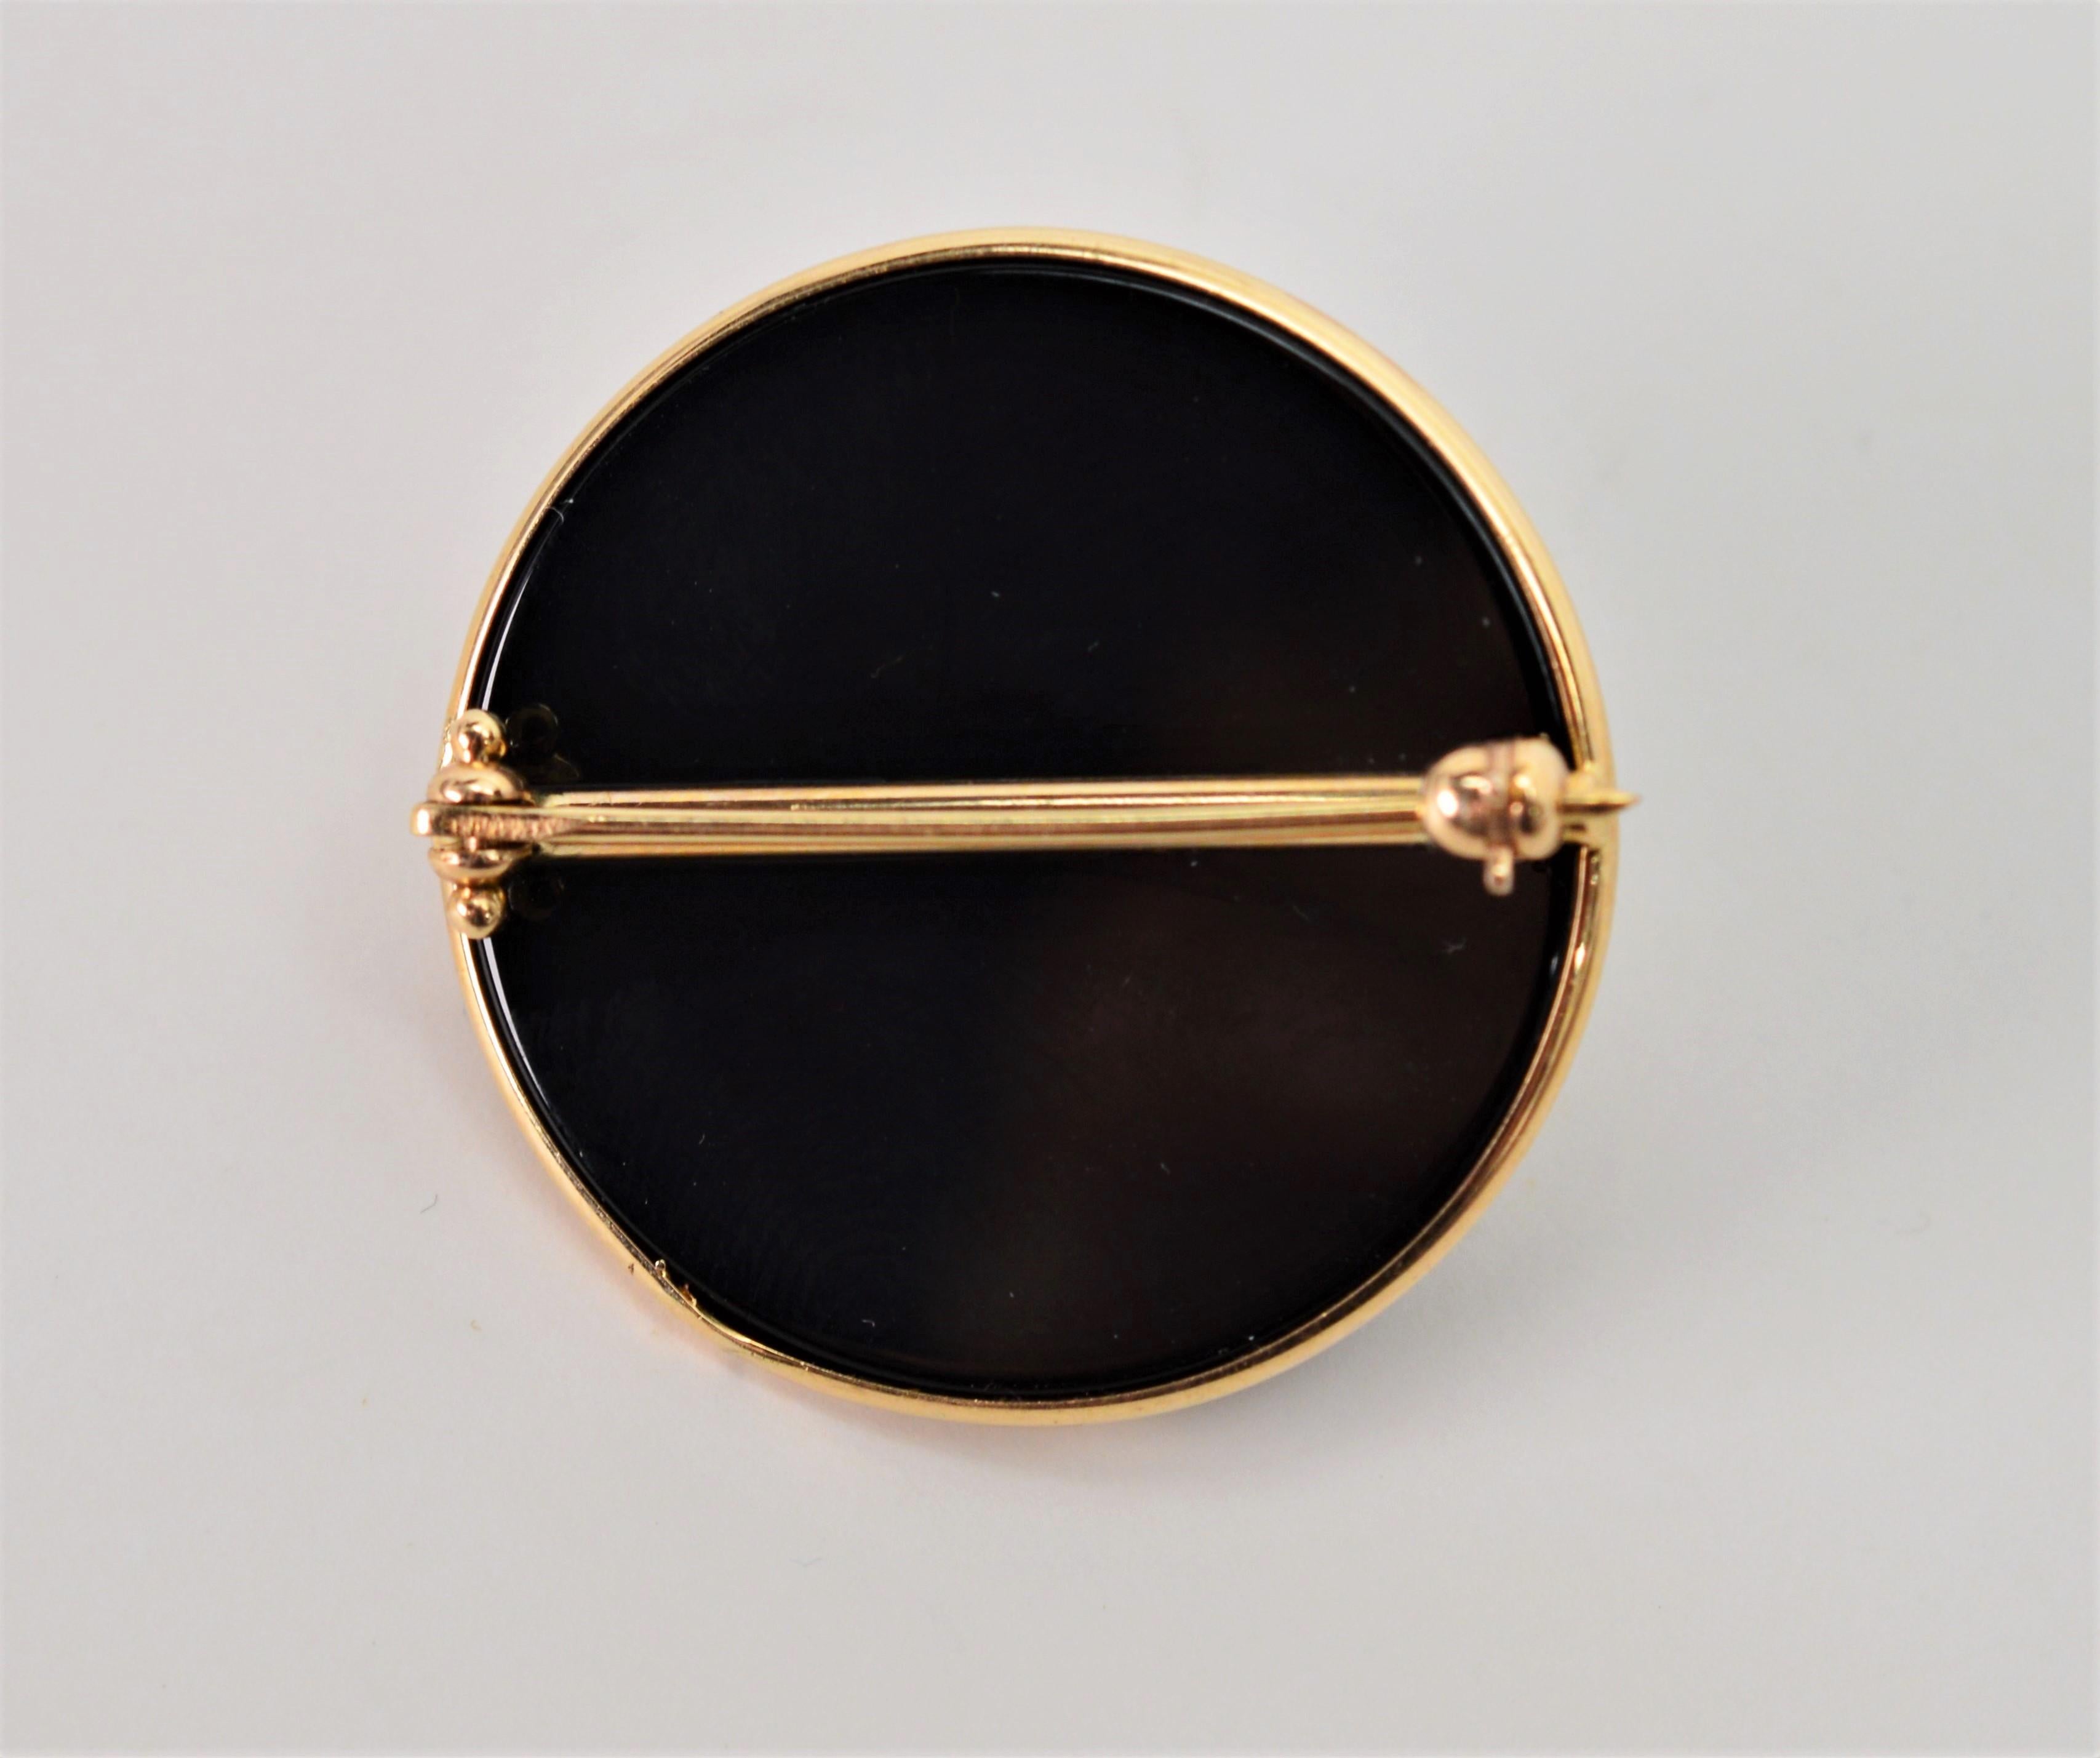 A classic combination of black, white and gold present beautifully in this emblem brooch. A 13.5 mm mabe pearl center is framed in black 
oynx and trimmed with fourteen carat gold enhancements.  This pin measures 1-1/8 inch in diameter. A great